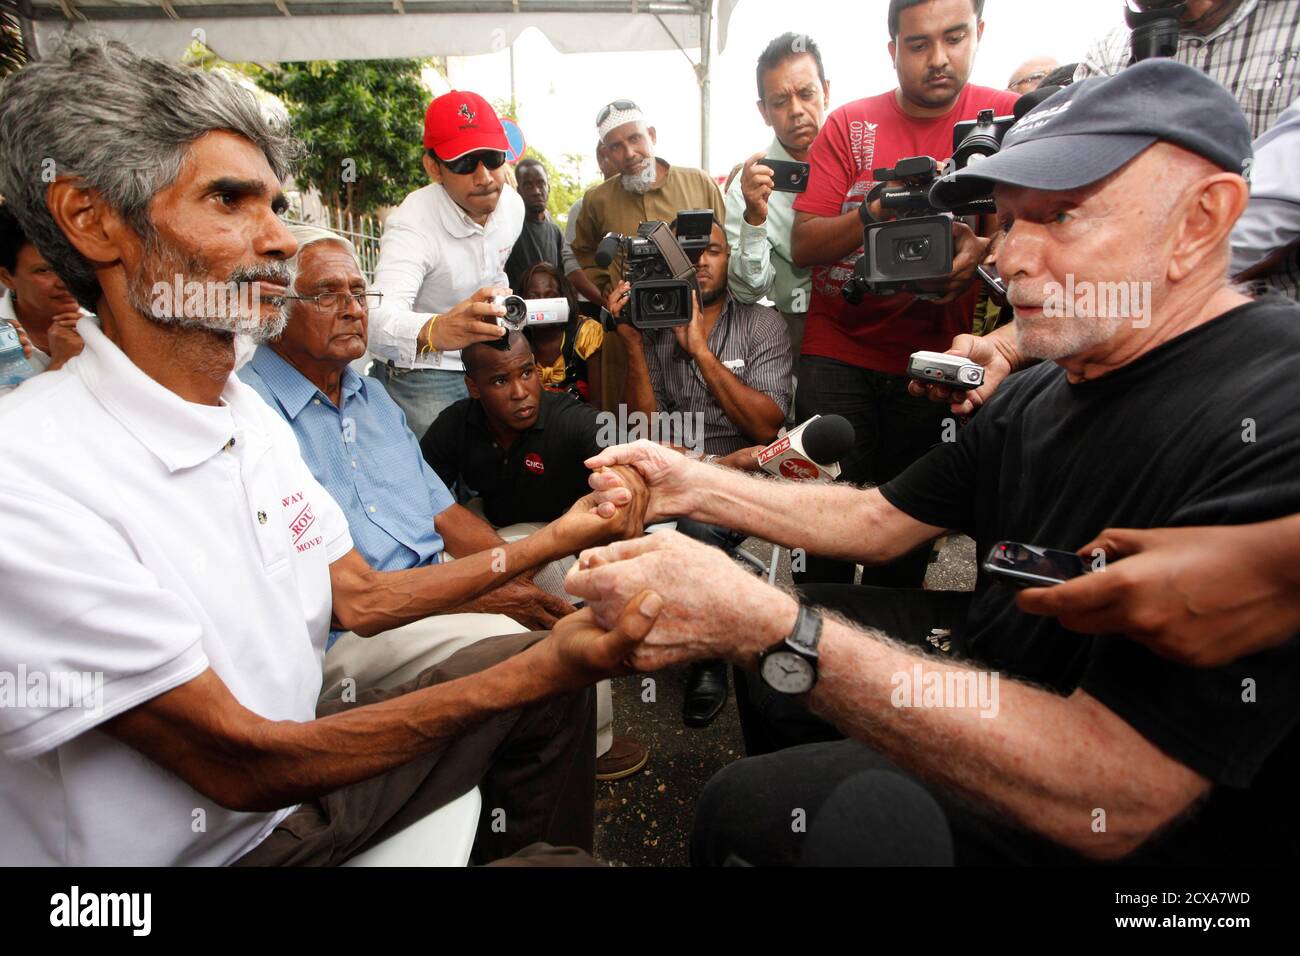 Highway Re-route Movement leader Wayne Kublalsingh (L) is greeted by Carnival costume designer Peter Minshall on the 16th day of Kublalsingh's hunger strike outside the prime minister's office in St. Clair, Port-of-Spain, November 30, 2012. The Highway Re-route Movement is demanding that the government re-route the construction of a new highway from San Fernando to Point Fortin in southern Trinidad, which the group says will displace more than 300 families and have a negative environmental impact on the Oropouche Lagoon. REUTERS/Andrea De Silva (TRINIDAD AND TOBAGO - Tags: POLITICS BUSINESS EM Stock Photo